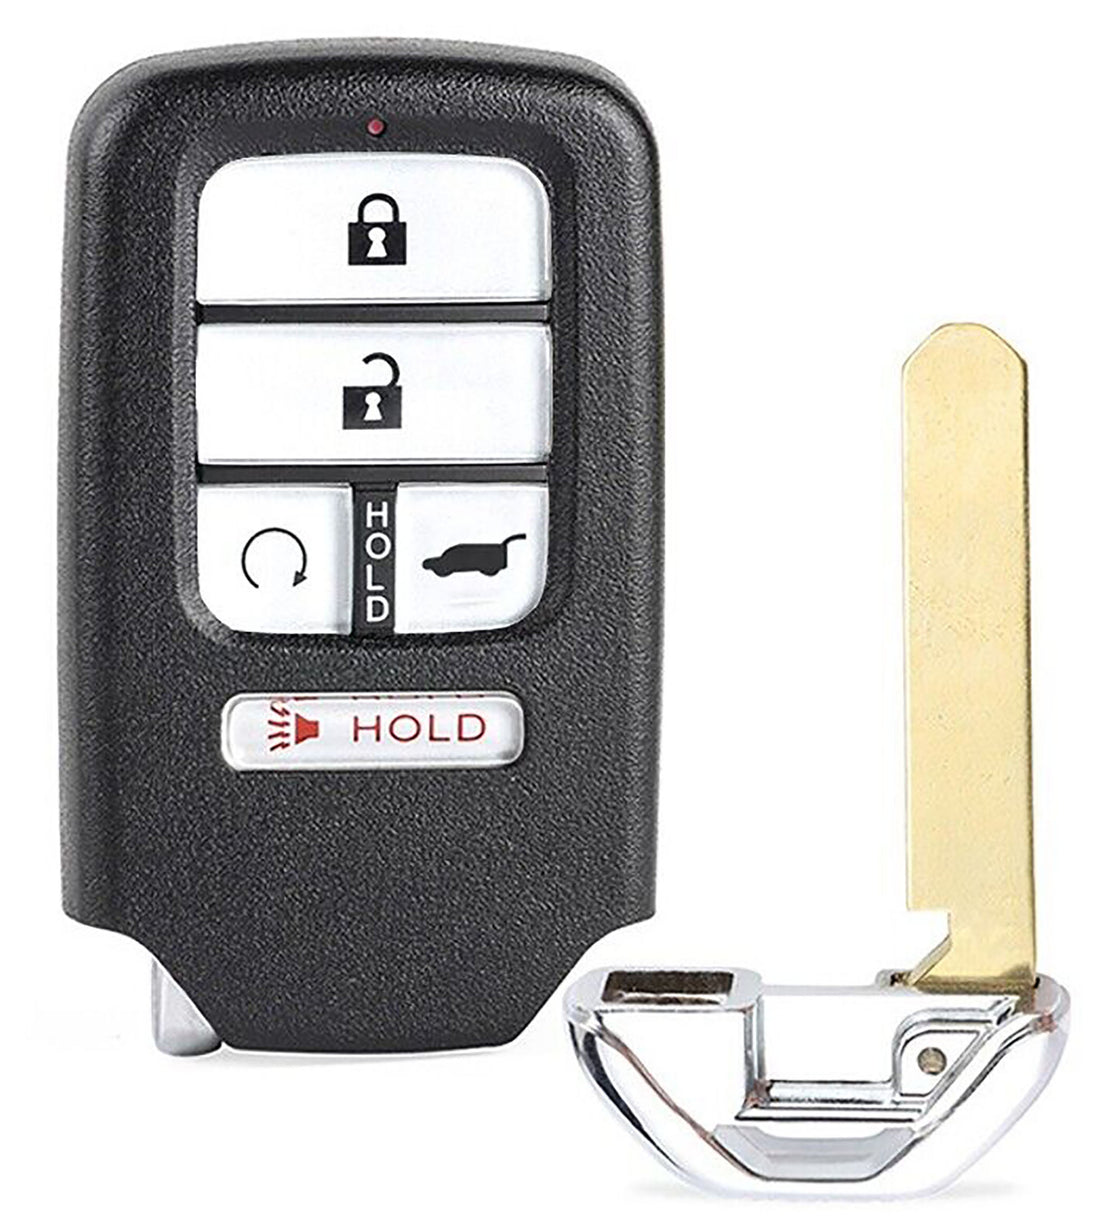 1x New Replacement Proximity Remote Key Fob Compatible with & Fit For Honda Vehicles KR5V2X - MPN KR5V2X-10